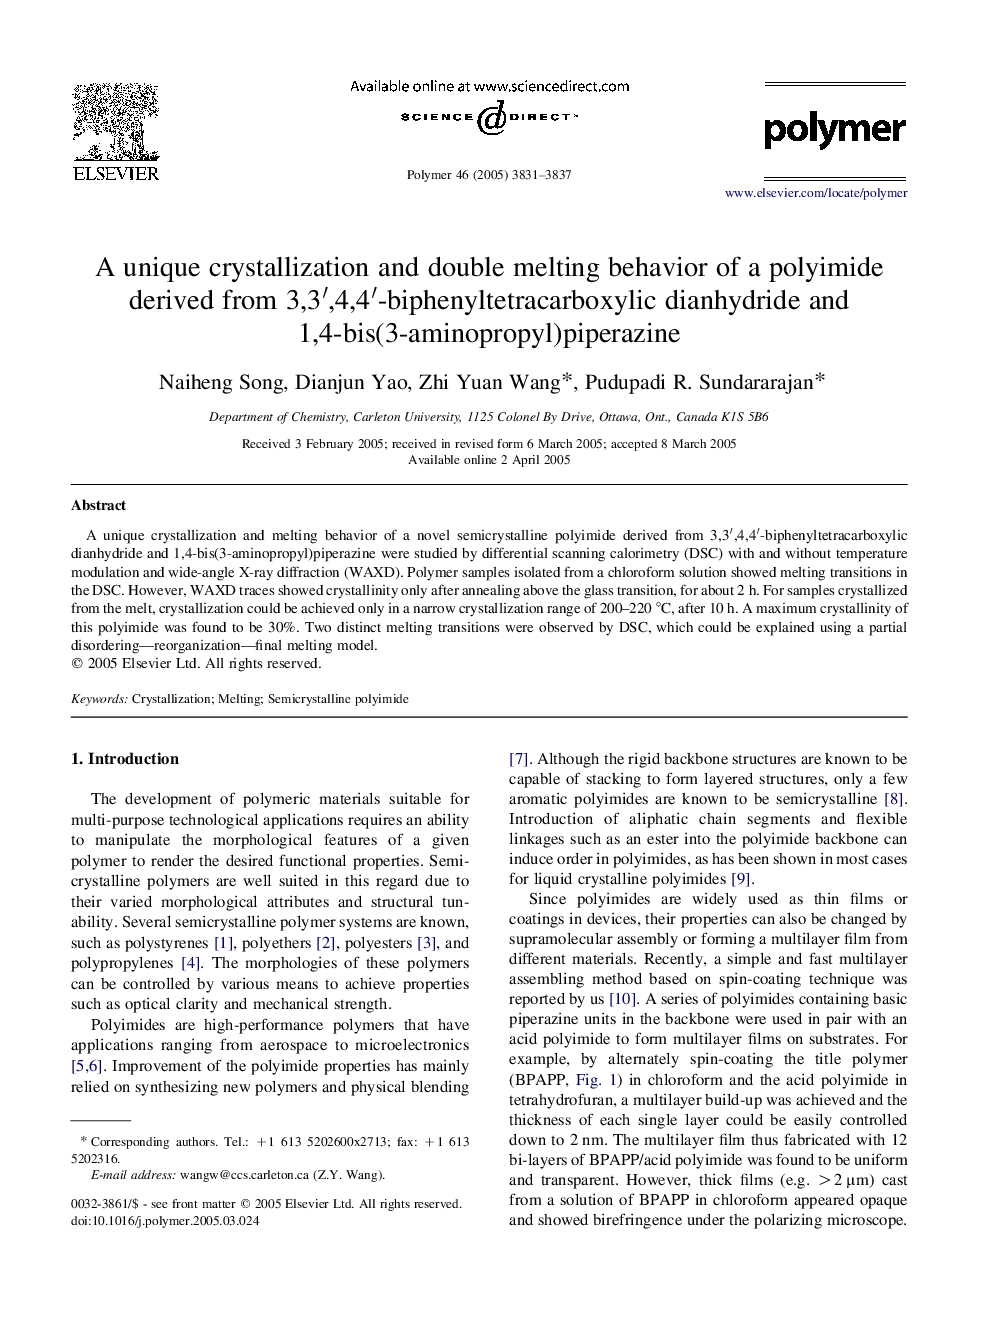 A unique crystallization and double melting behavior of a polyimide derived from 3,3â²,4,4â²-biphenyltetracarboxylic dianhydride and 1,4-bis(3-aminopropyl)piperazine